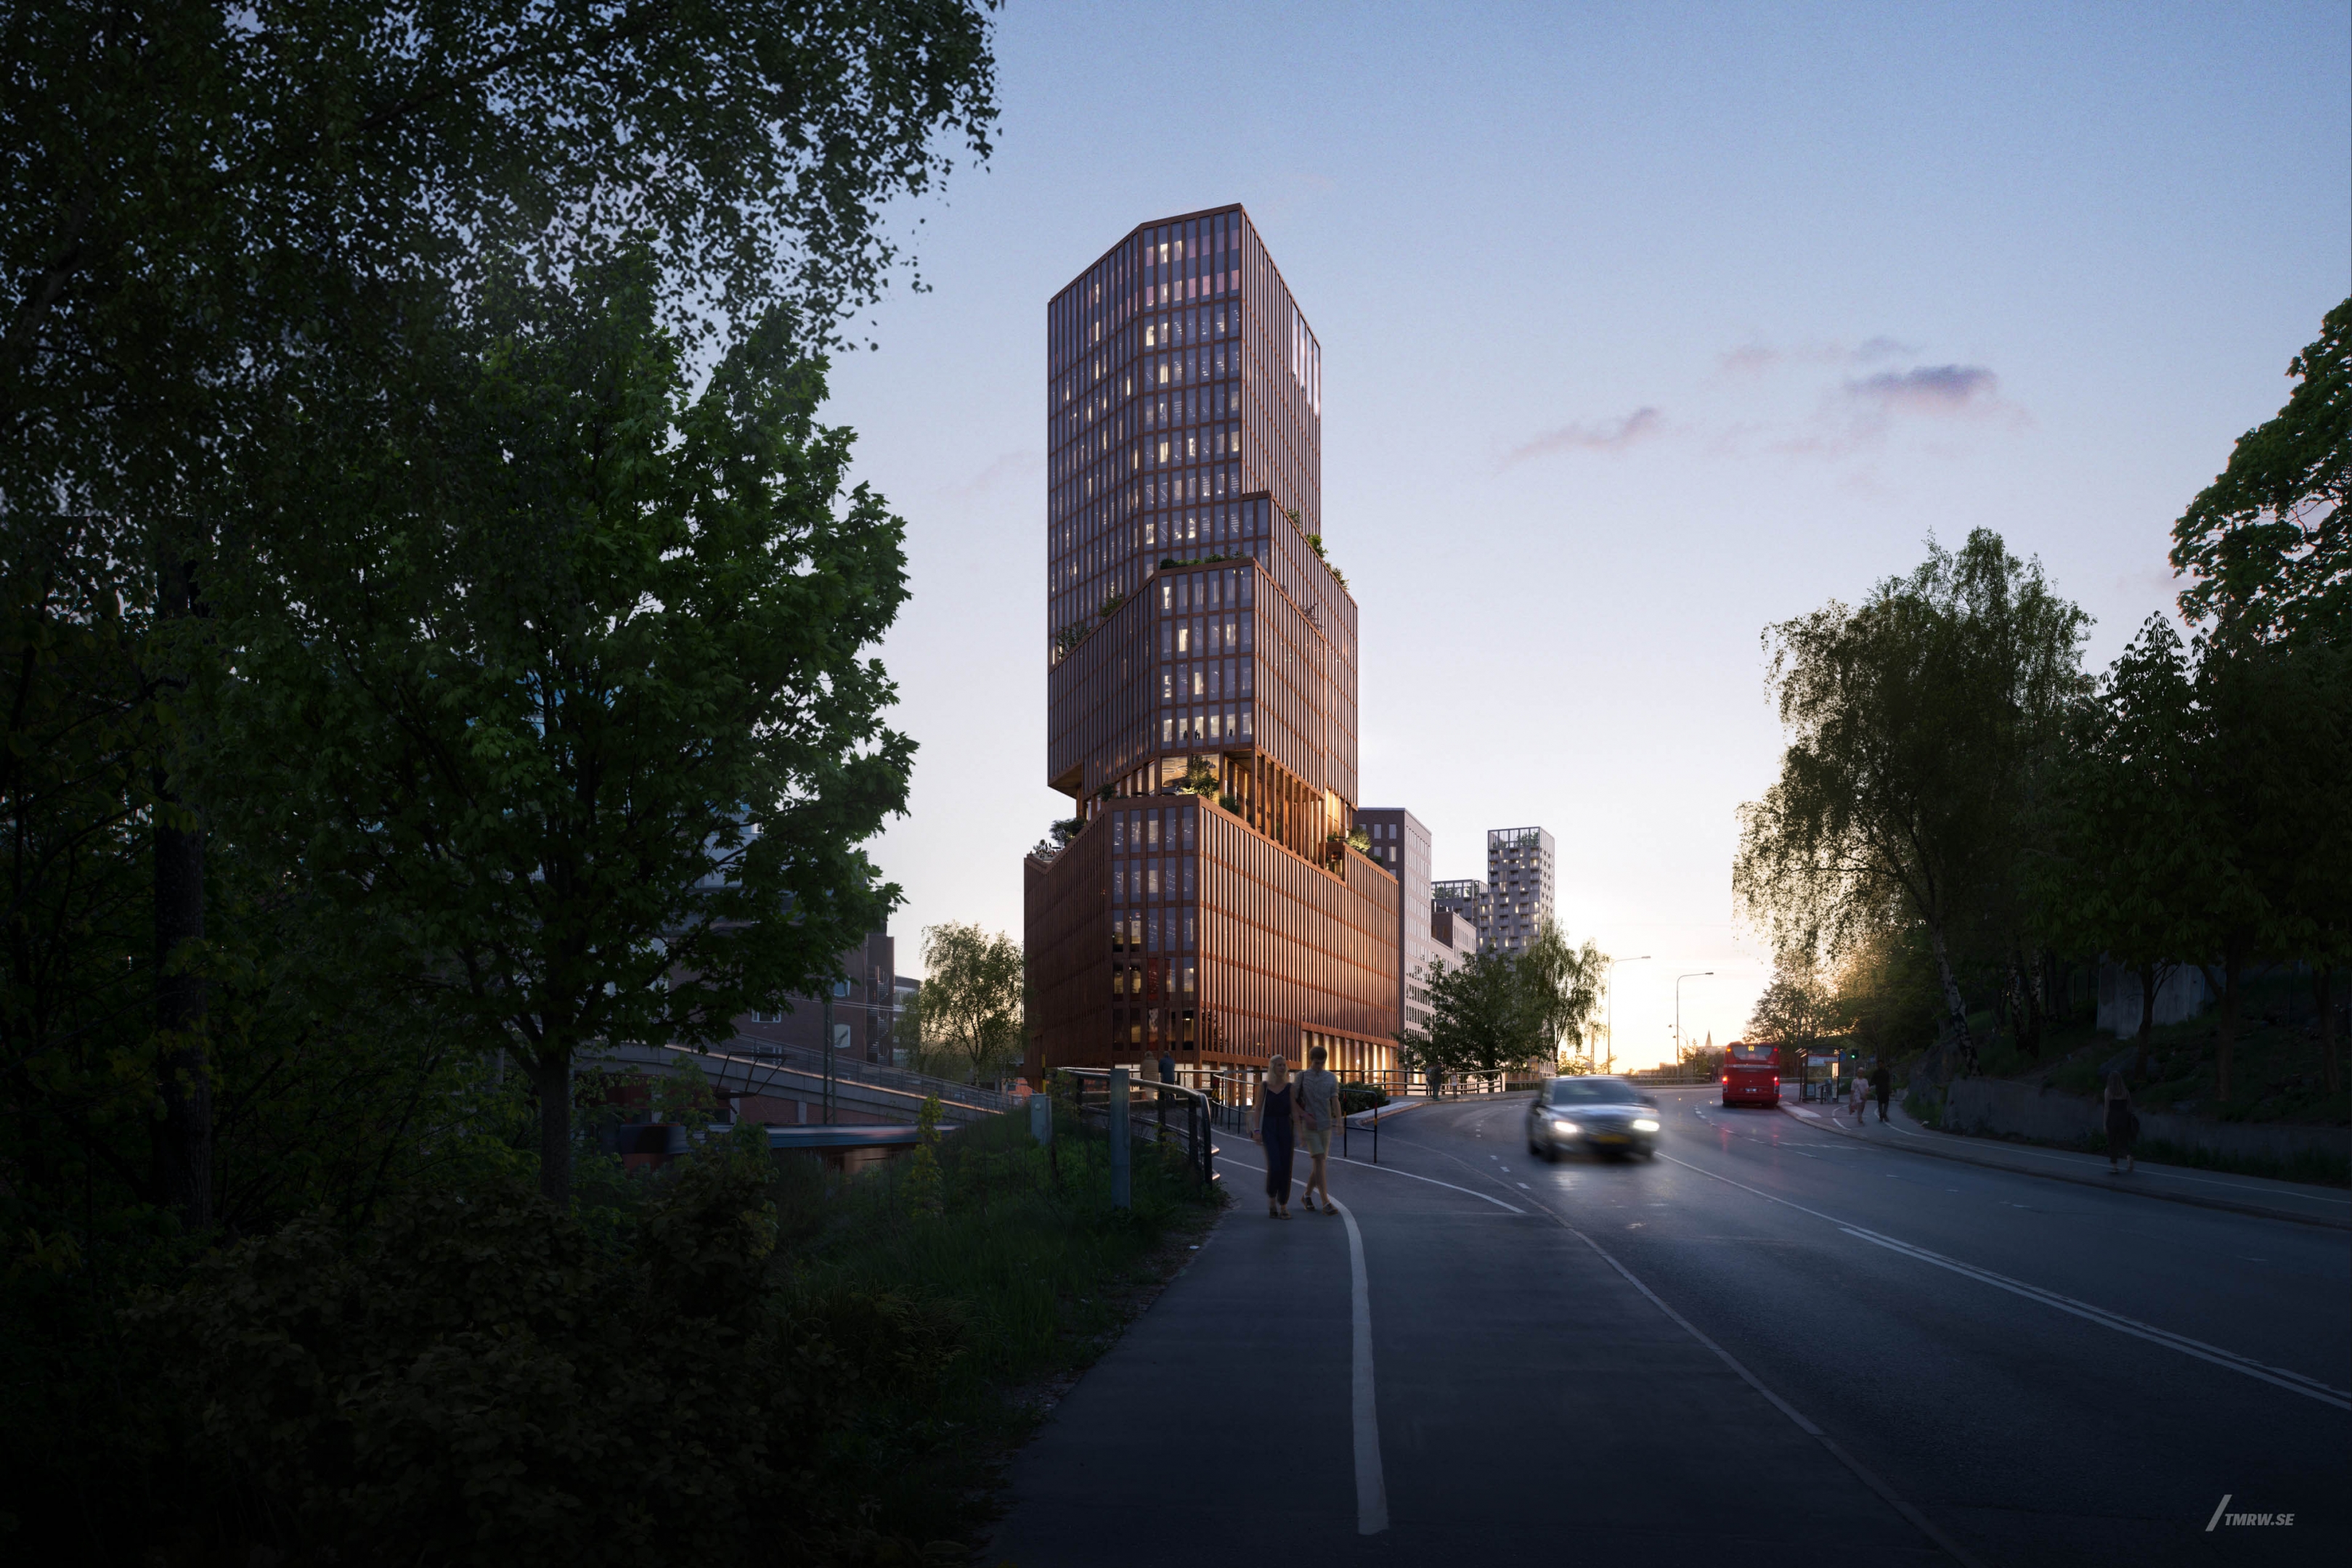 Architectural visualization of Sickla Tower for Kanozi a skyscraper in shadow day light from a street view.